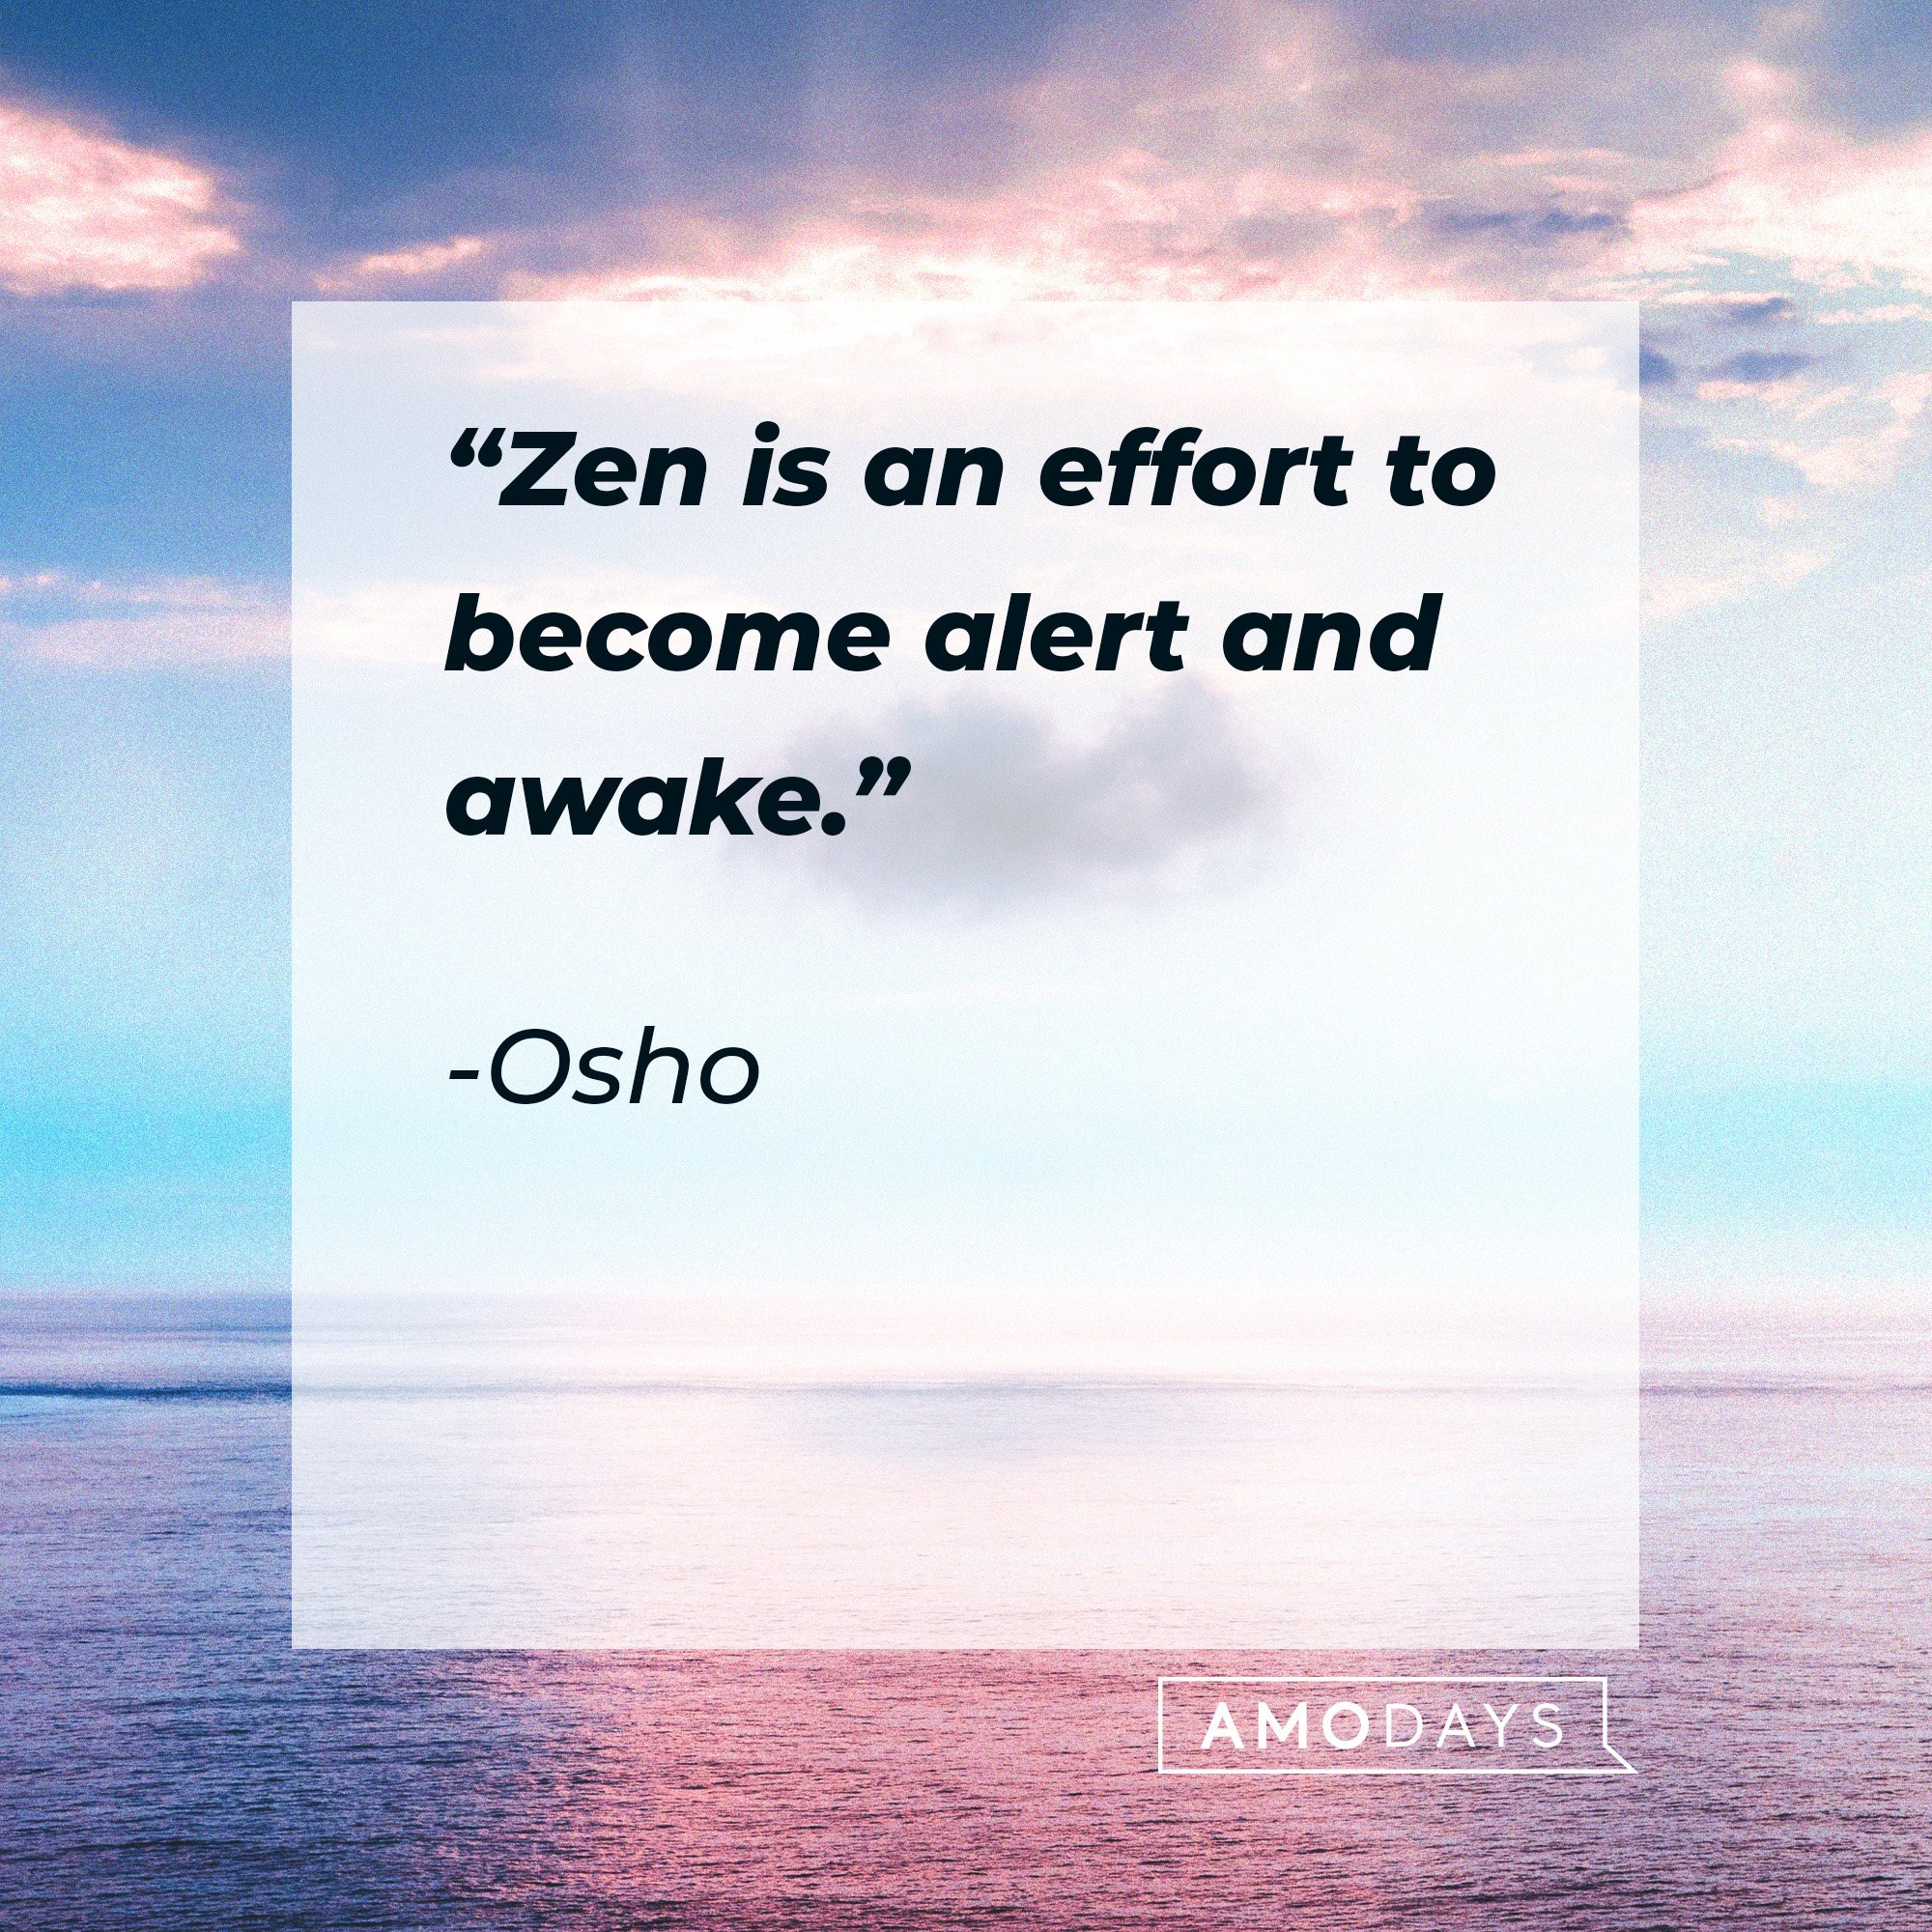  Osho's quote: “Zen is an effort to become alert and awake.” | Image: AmoDays